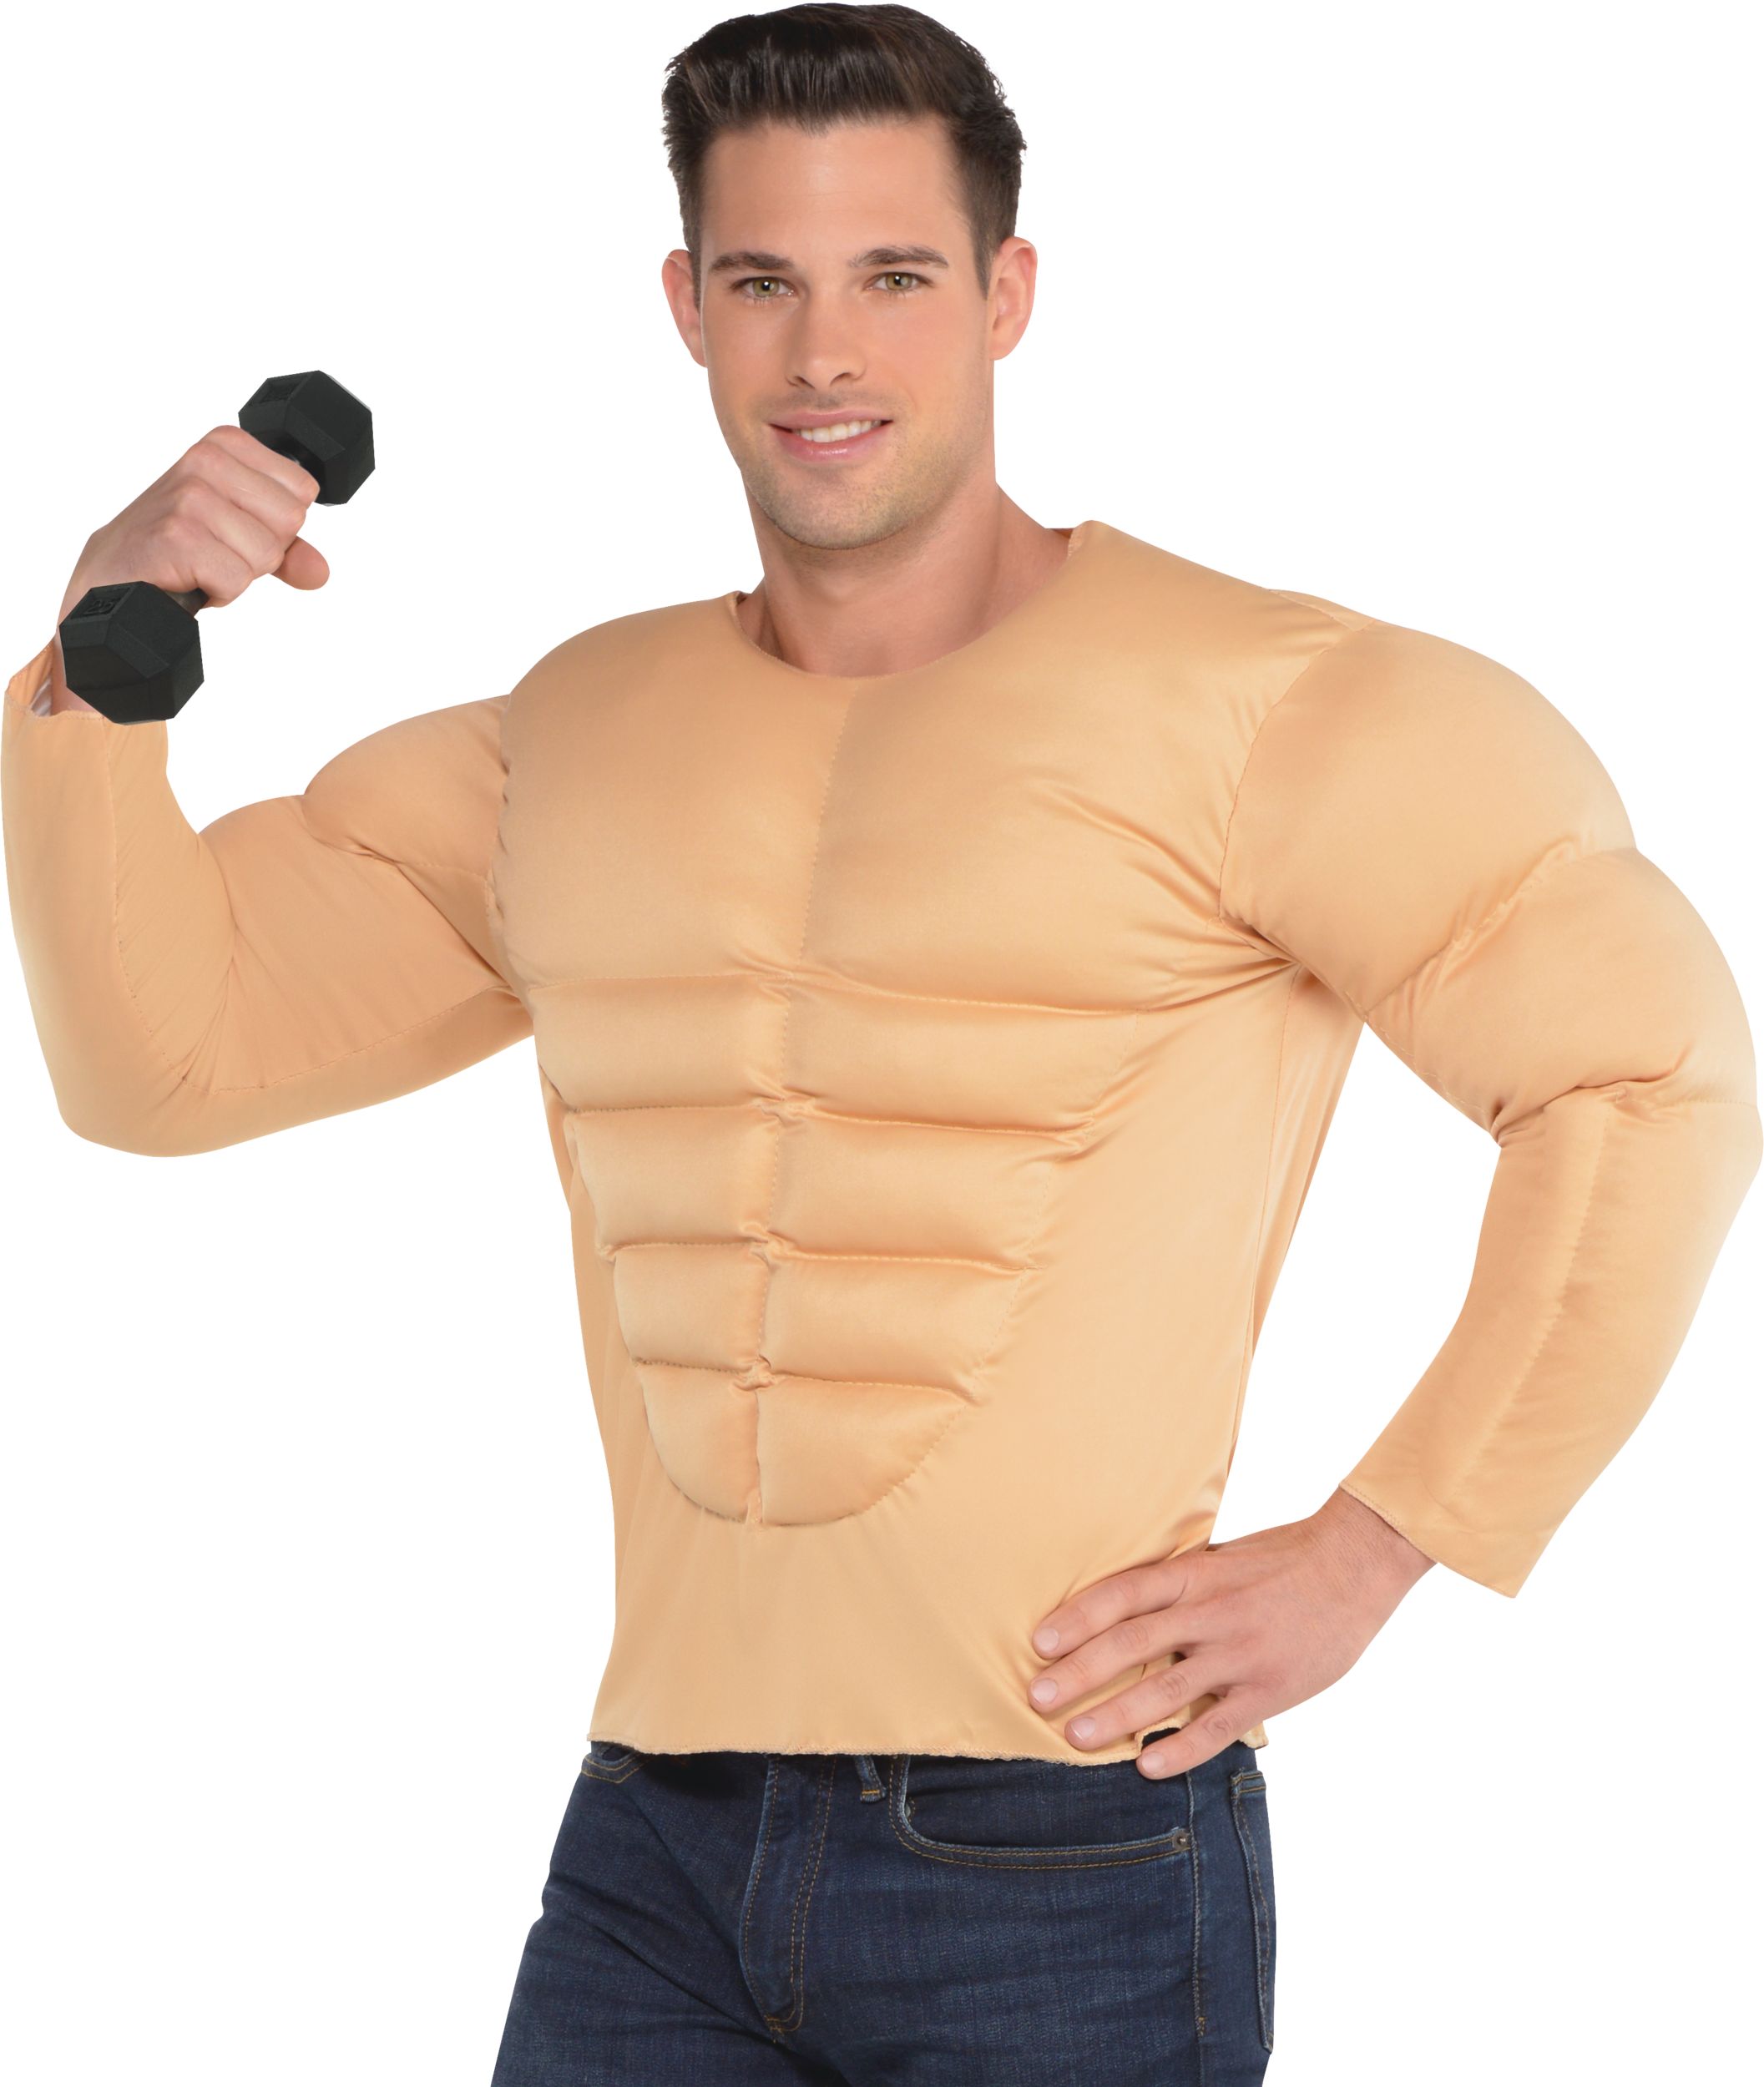 Muscle Padding Shirt Halloween Costume Accessory for Kids, Large